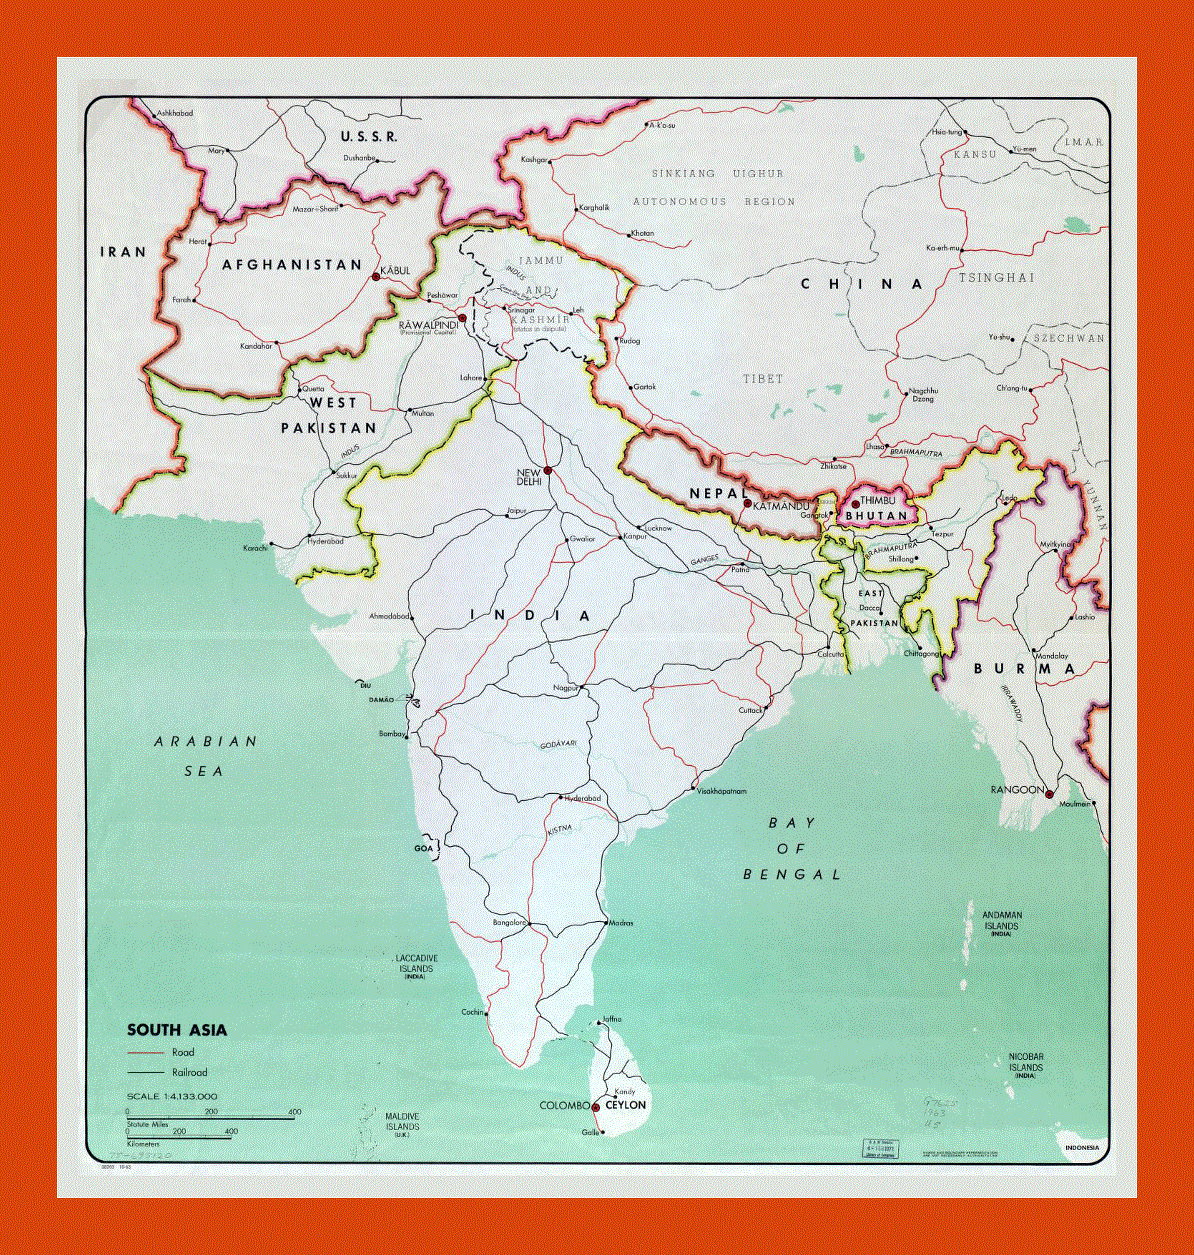 Map of South Asia - 1963